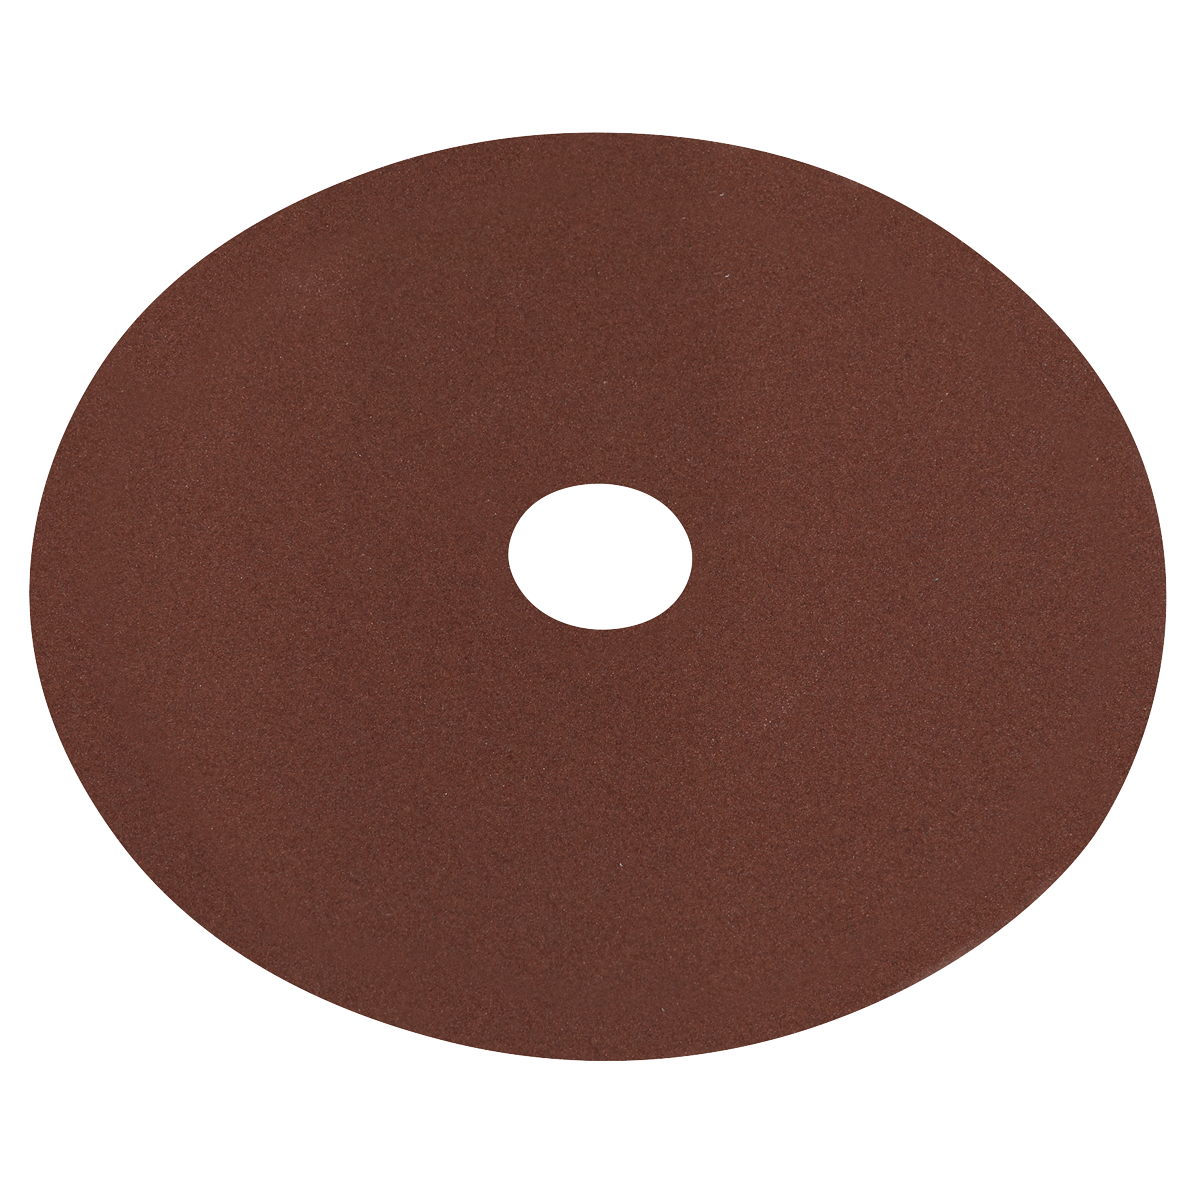 Fibre Backed Disc Ø115mm - 120Grit Pack of 25 - WSD45120 - Farming Parts